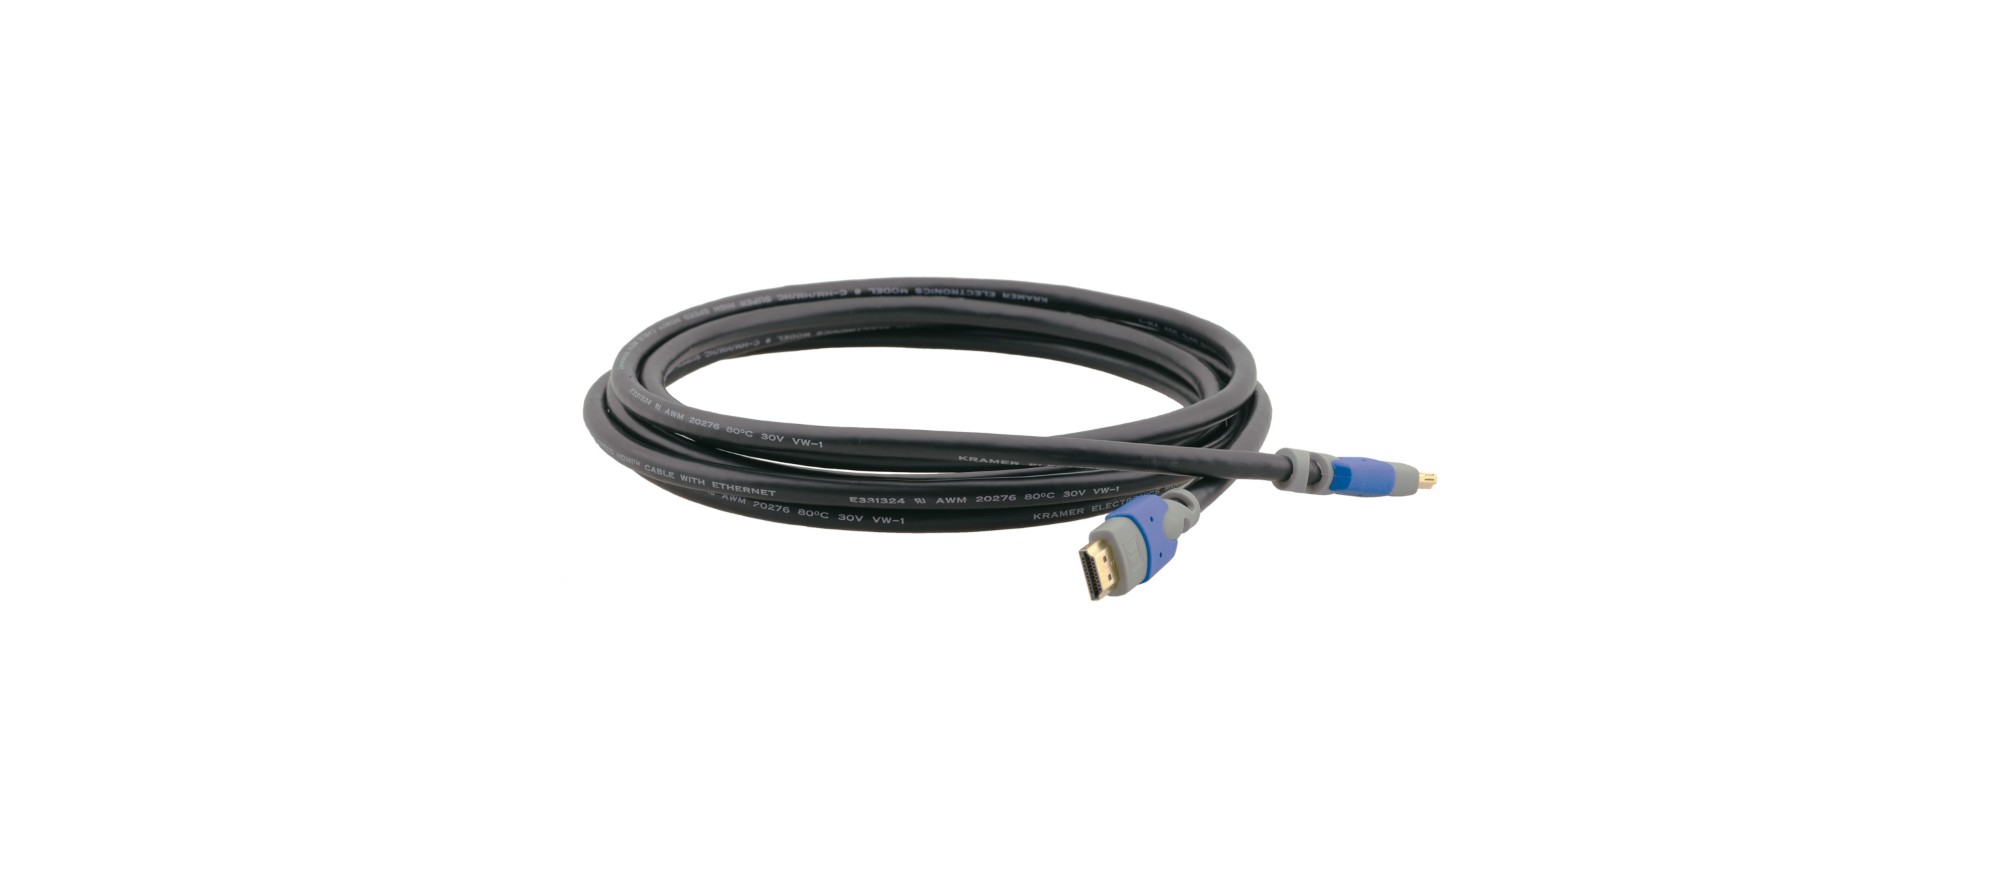 Photos - Cable (video, audio, USB) Kramer Electronics 19.5m, HDMI - HDMI HDMI cable HDMI Type A (Standard C-H 